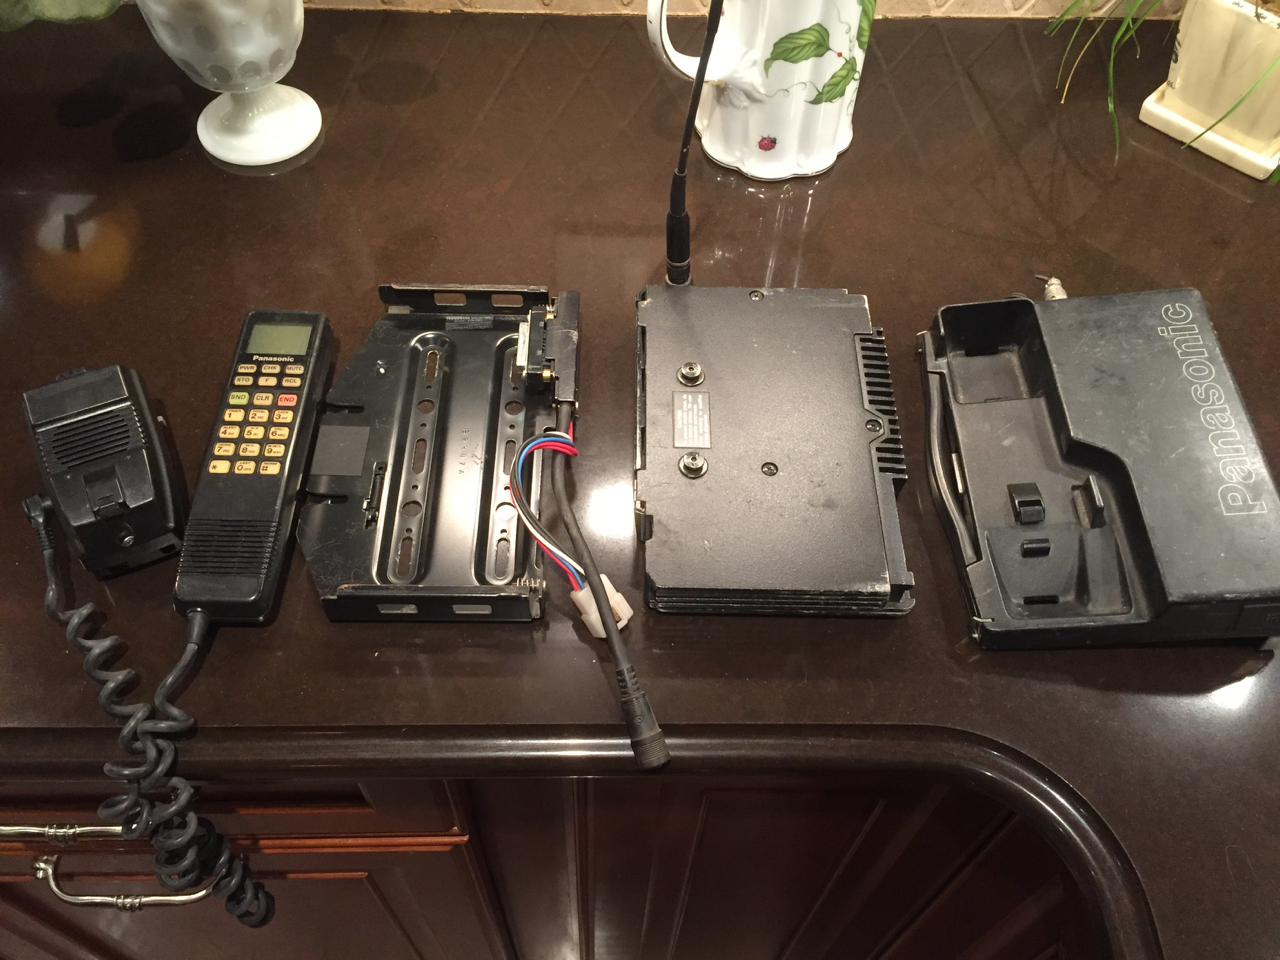 Panasonic EJB-114 AMPS cell phone system components